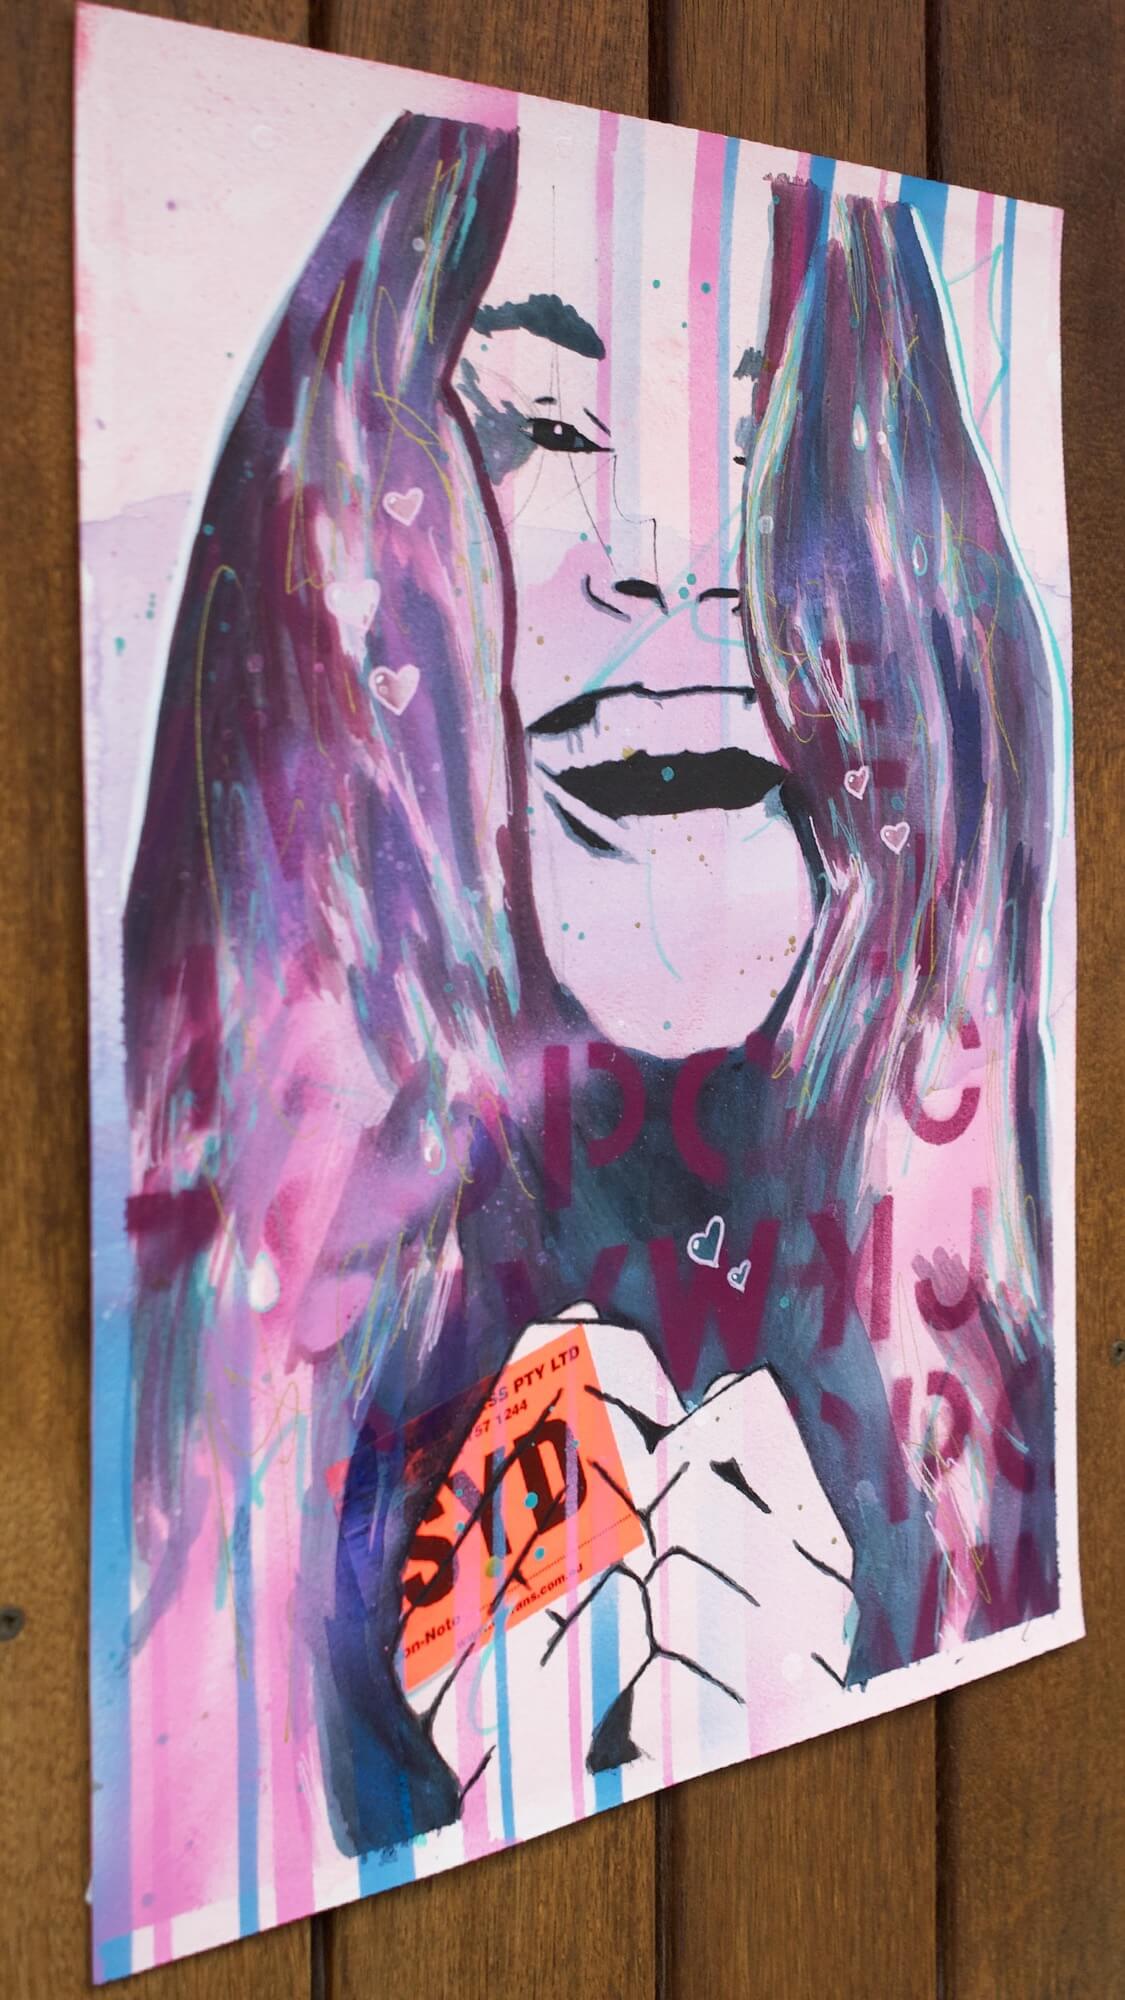 painting of a smiling woman in pinks and purples